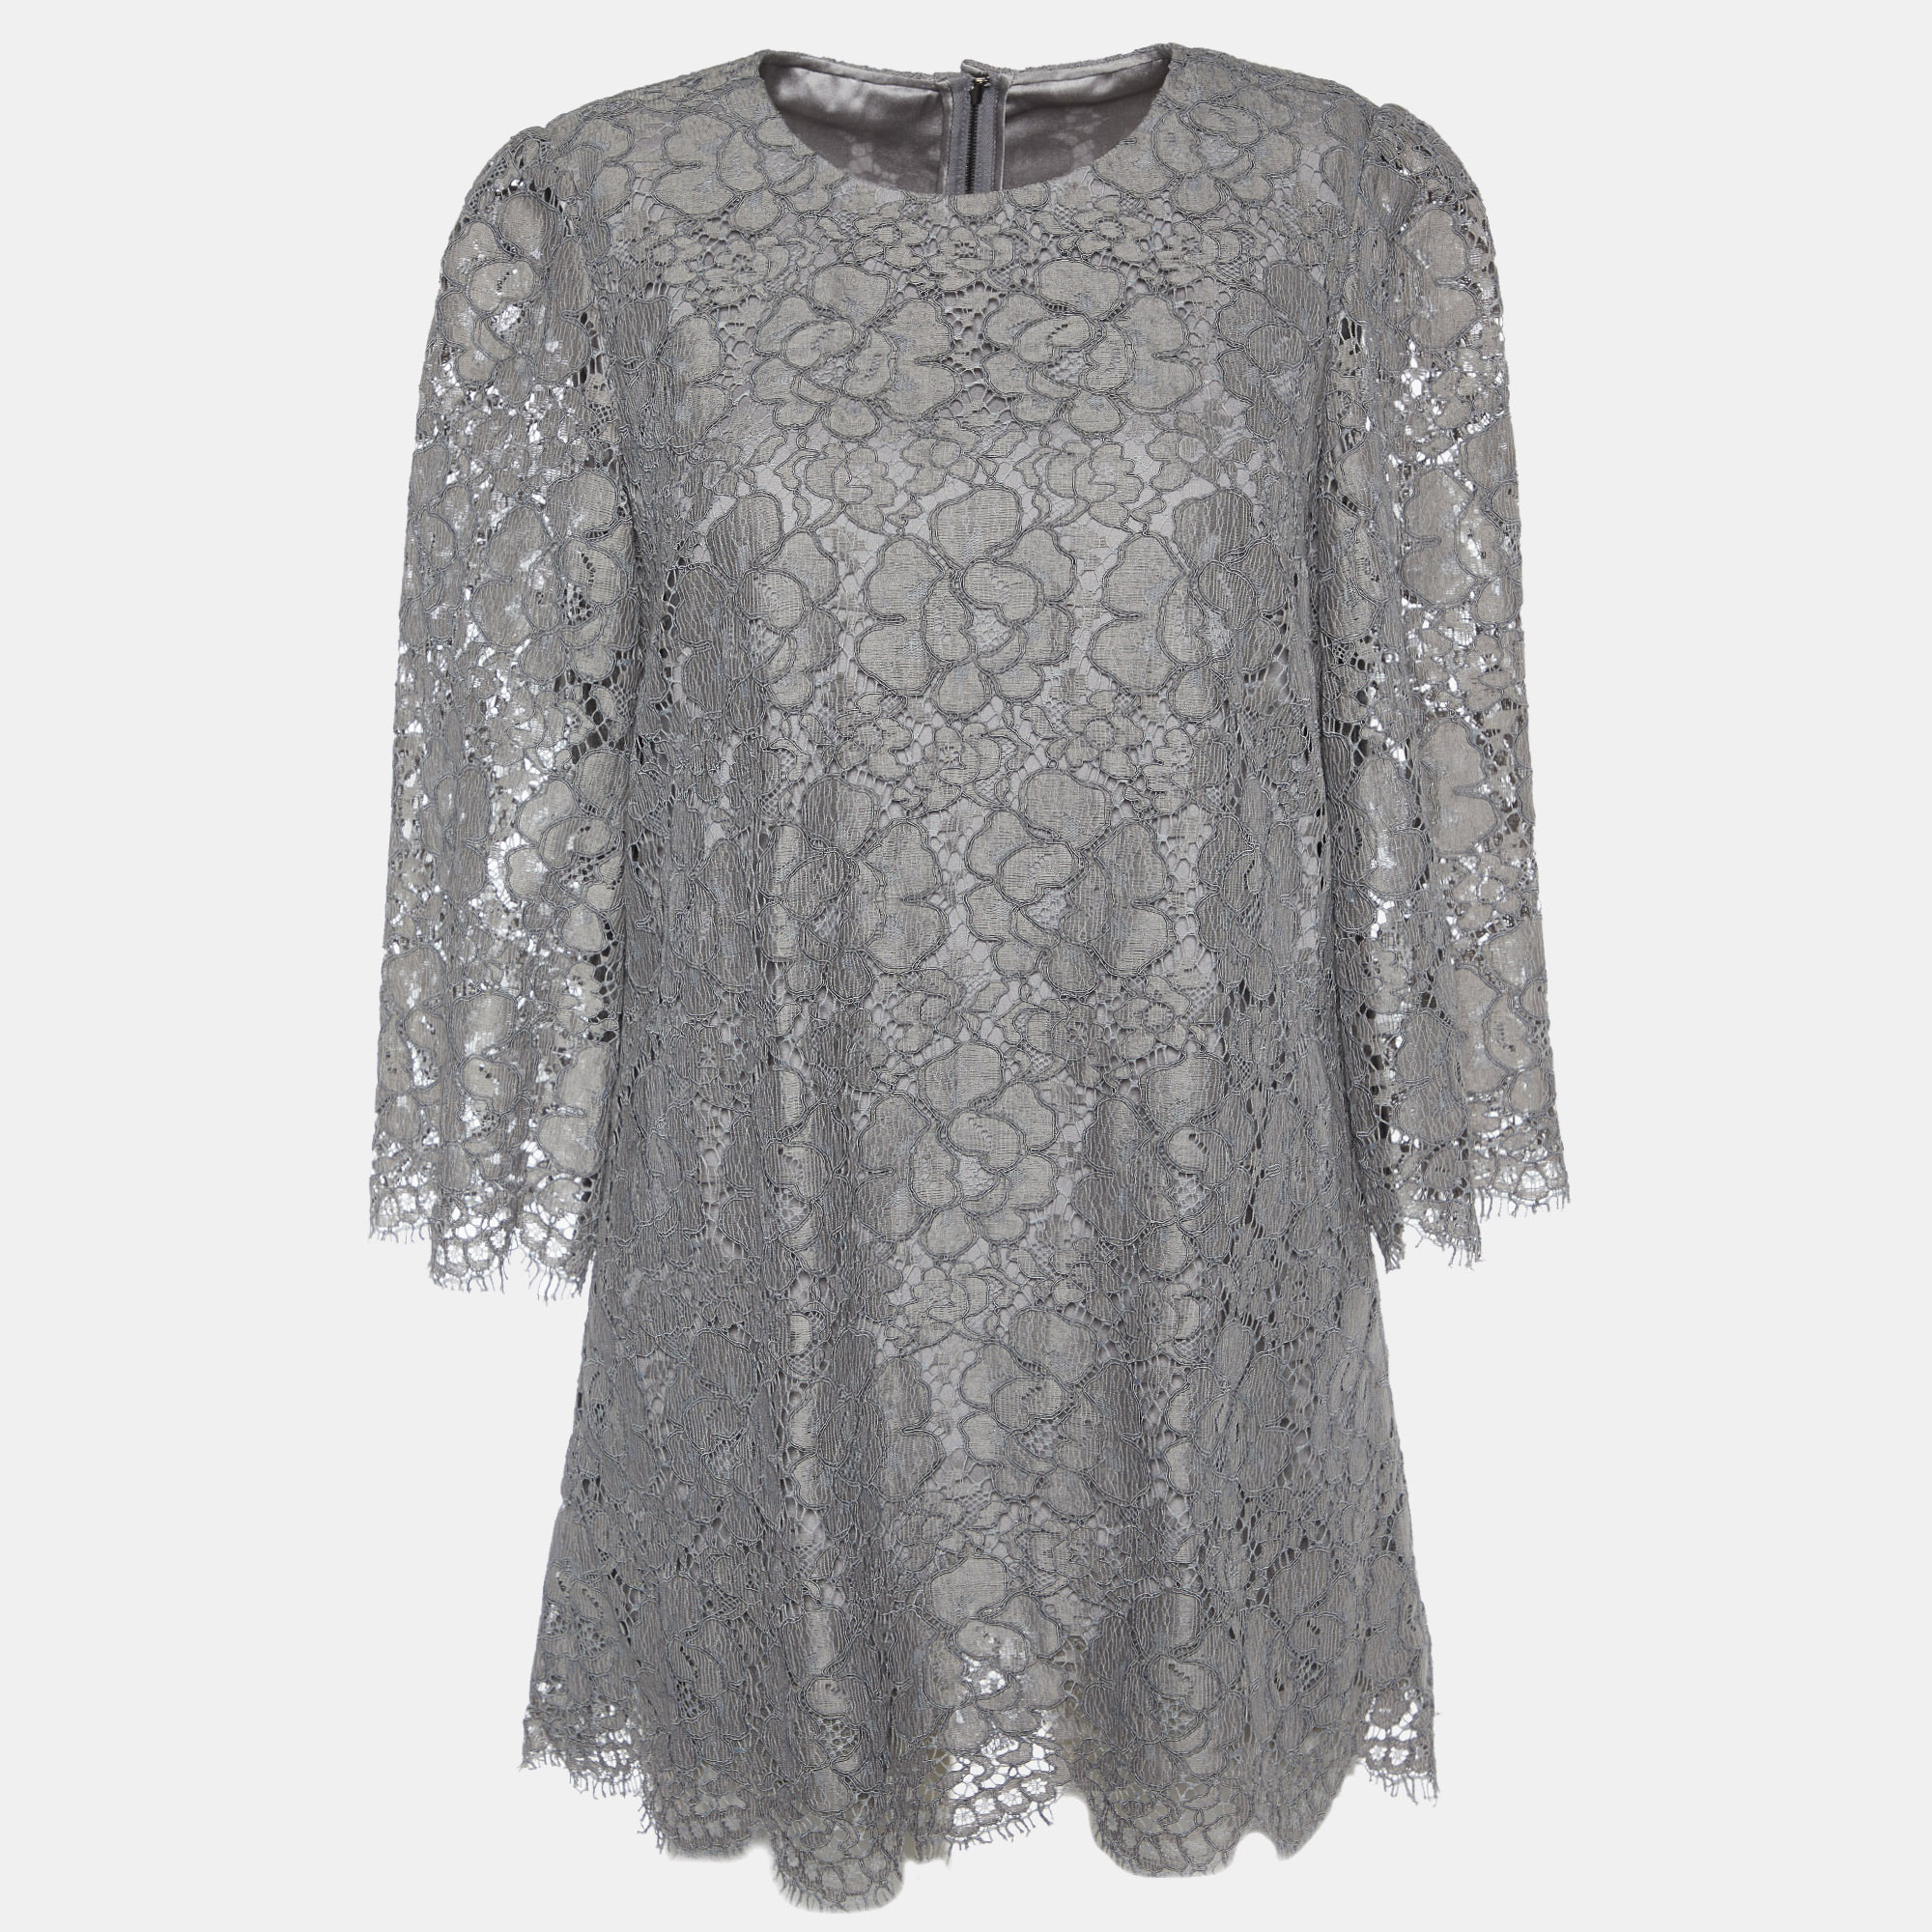 Dolce & Gabbana Grey Floral Corded Lace Three Quarter Sleeve Top M